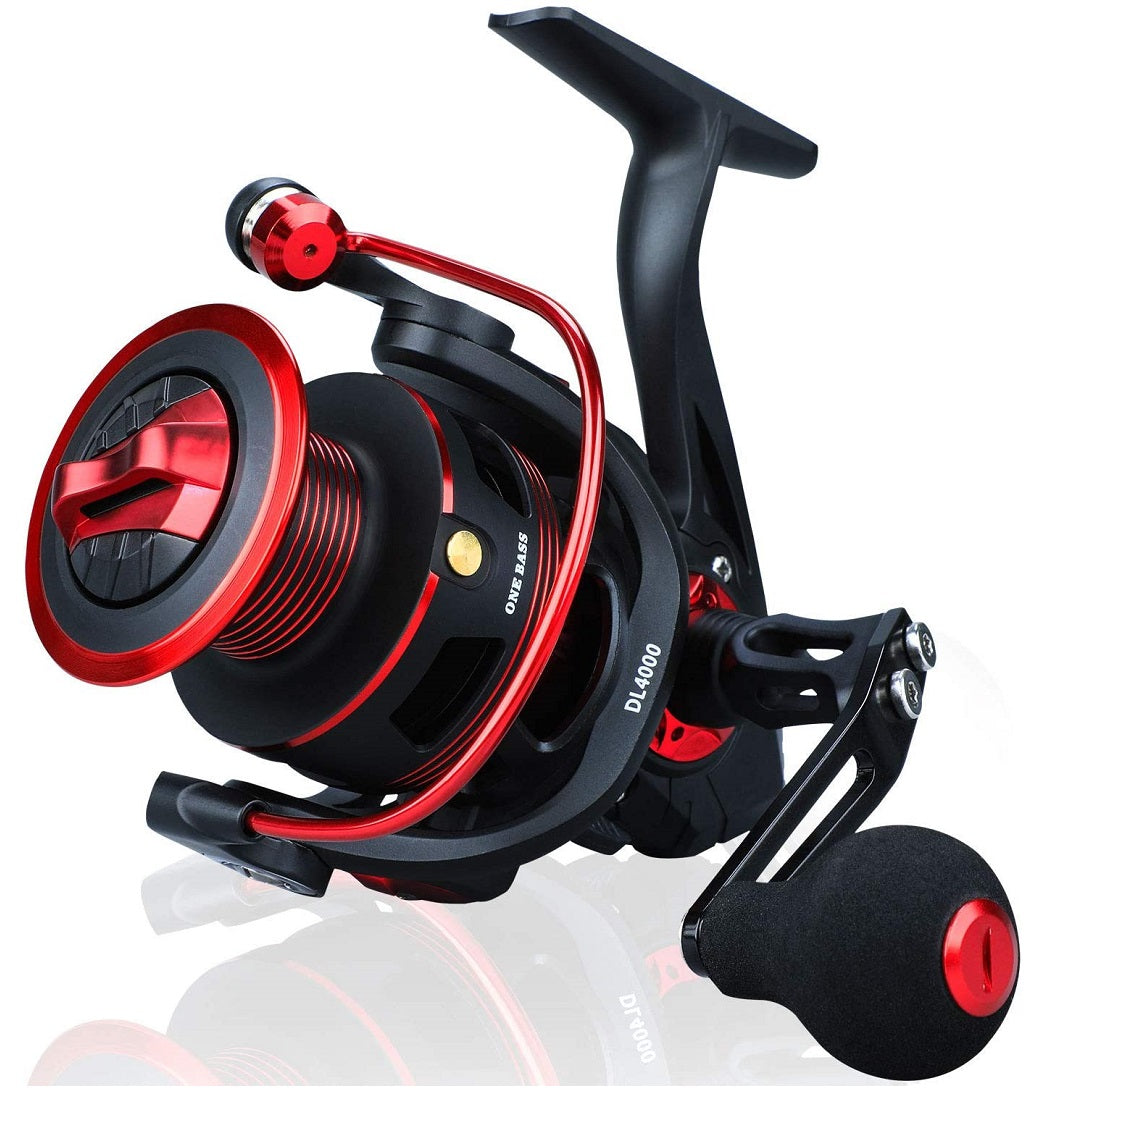 What size reel should a beginner purchase for inshore saltwater